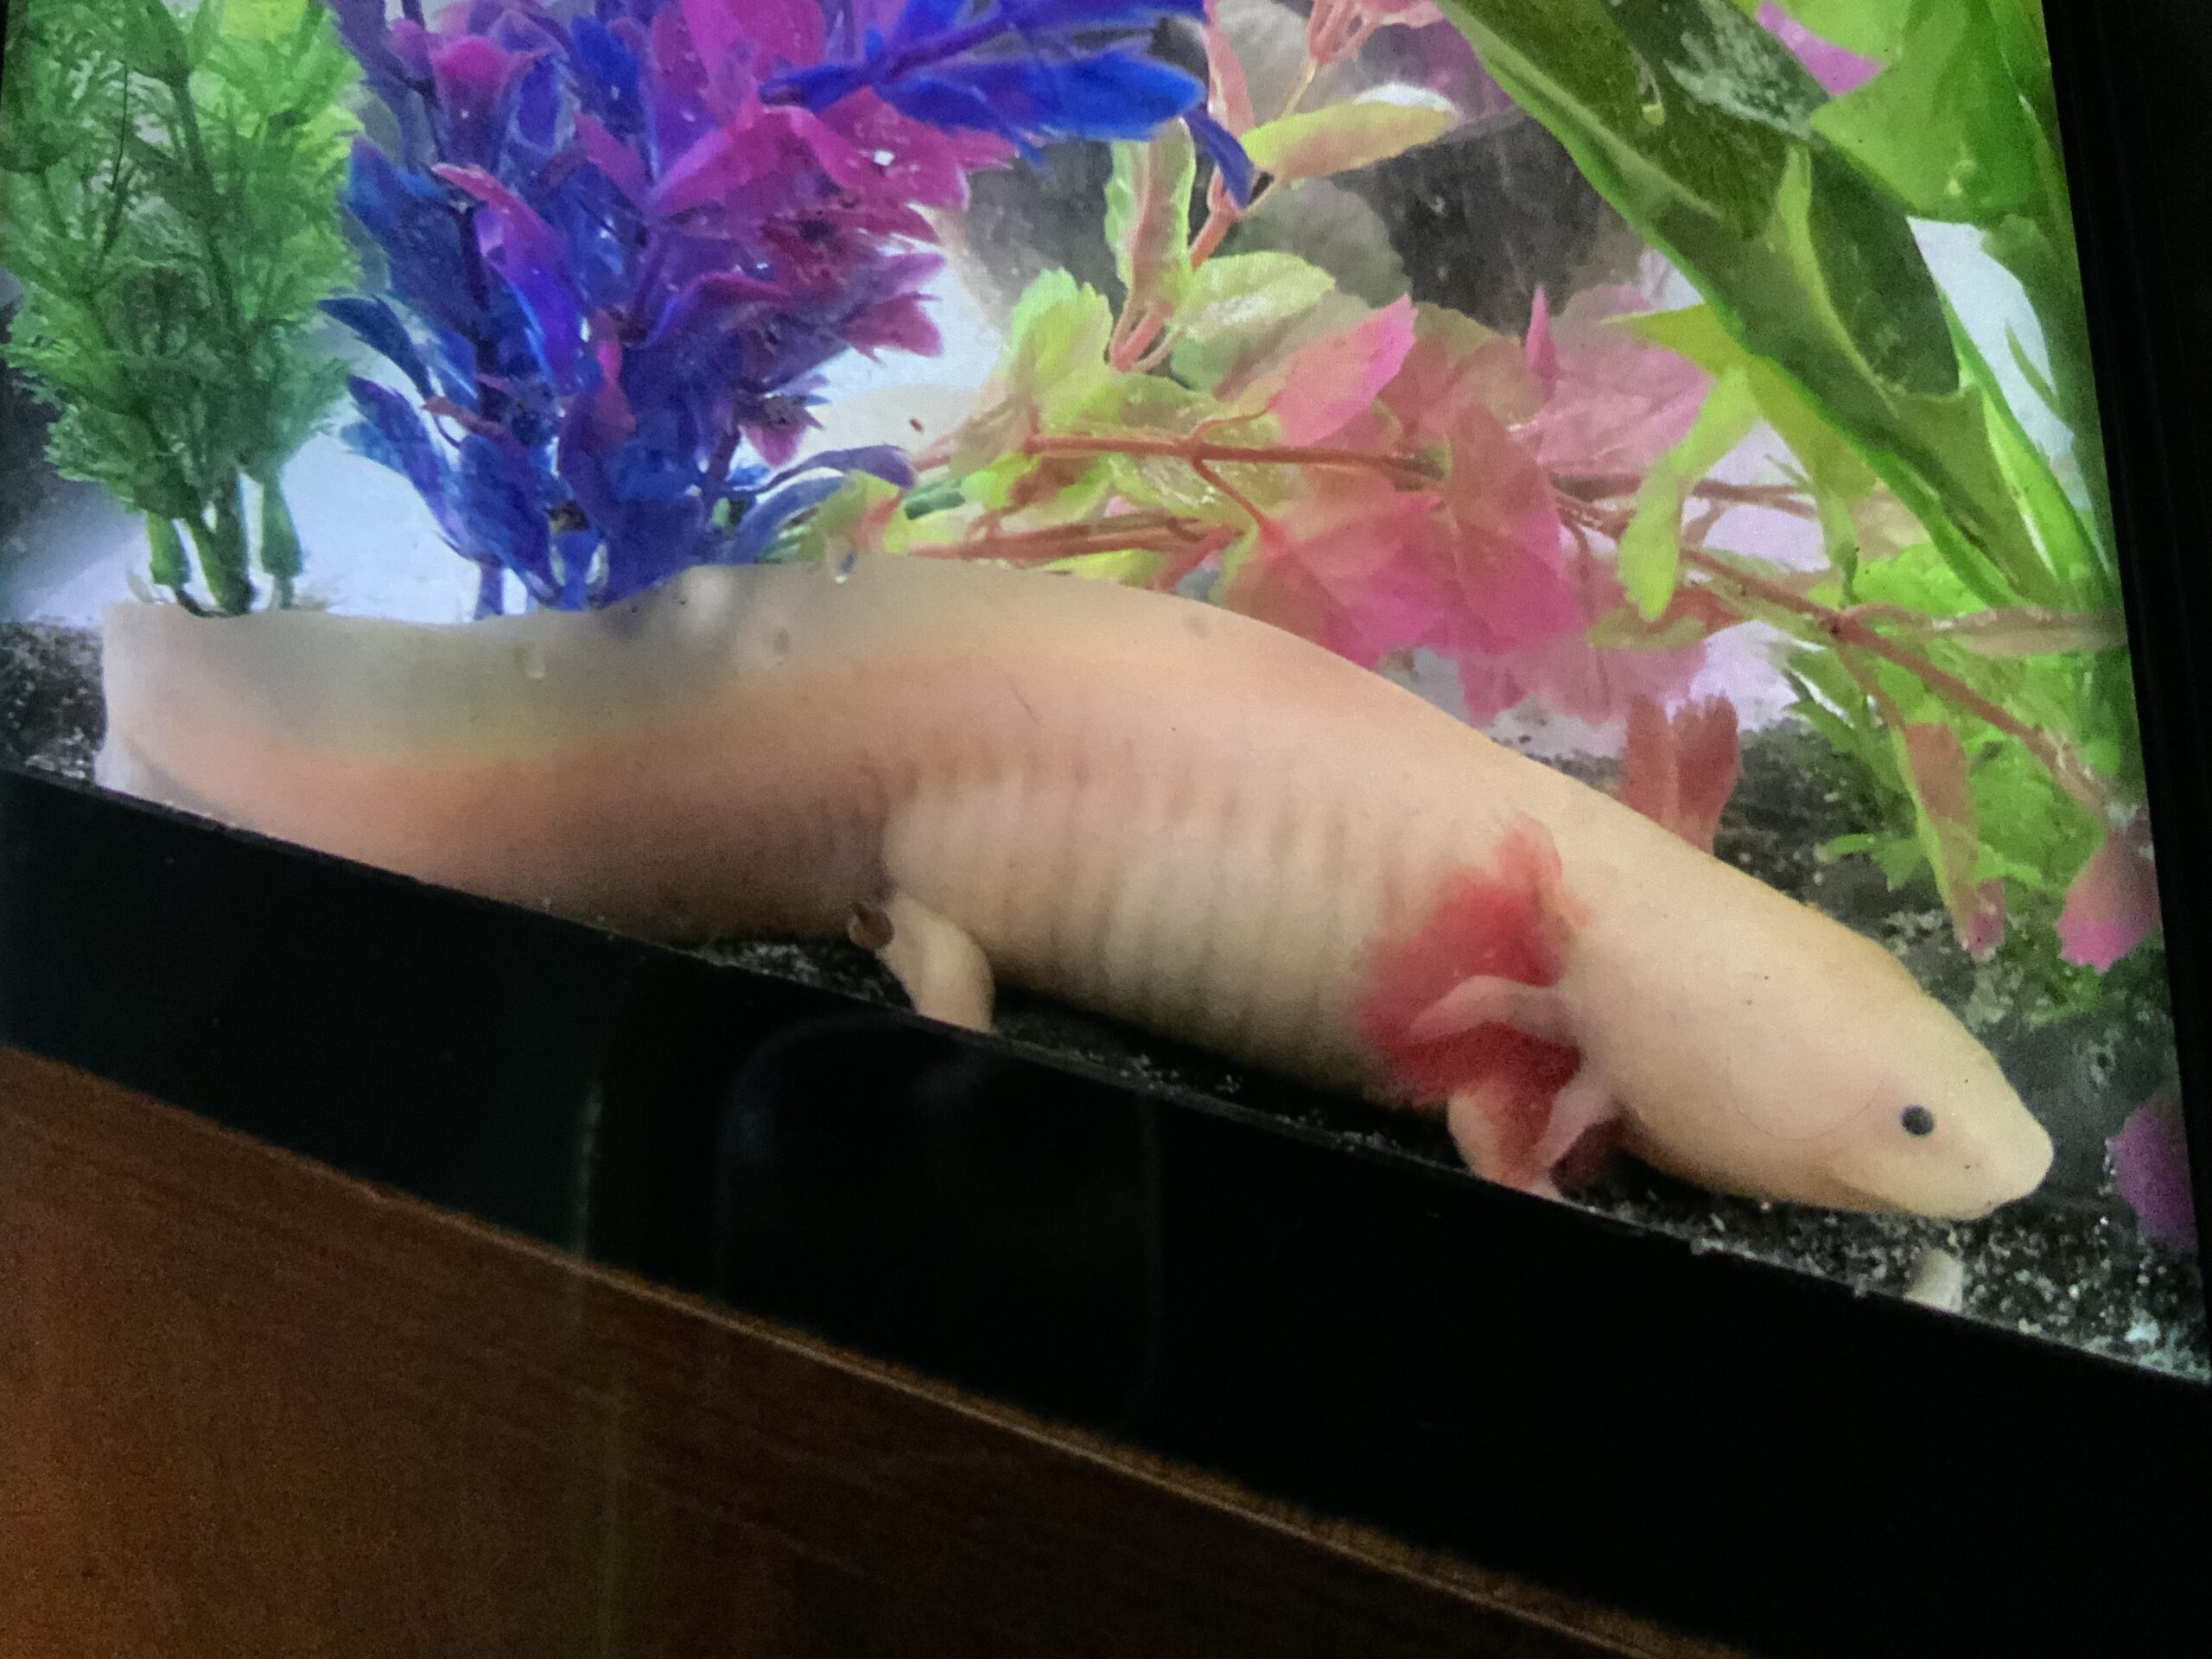 Lusting over my new Axolotl passion